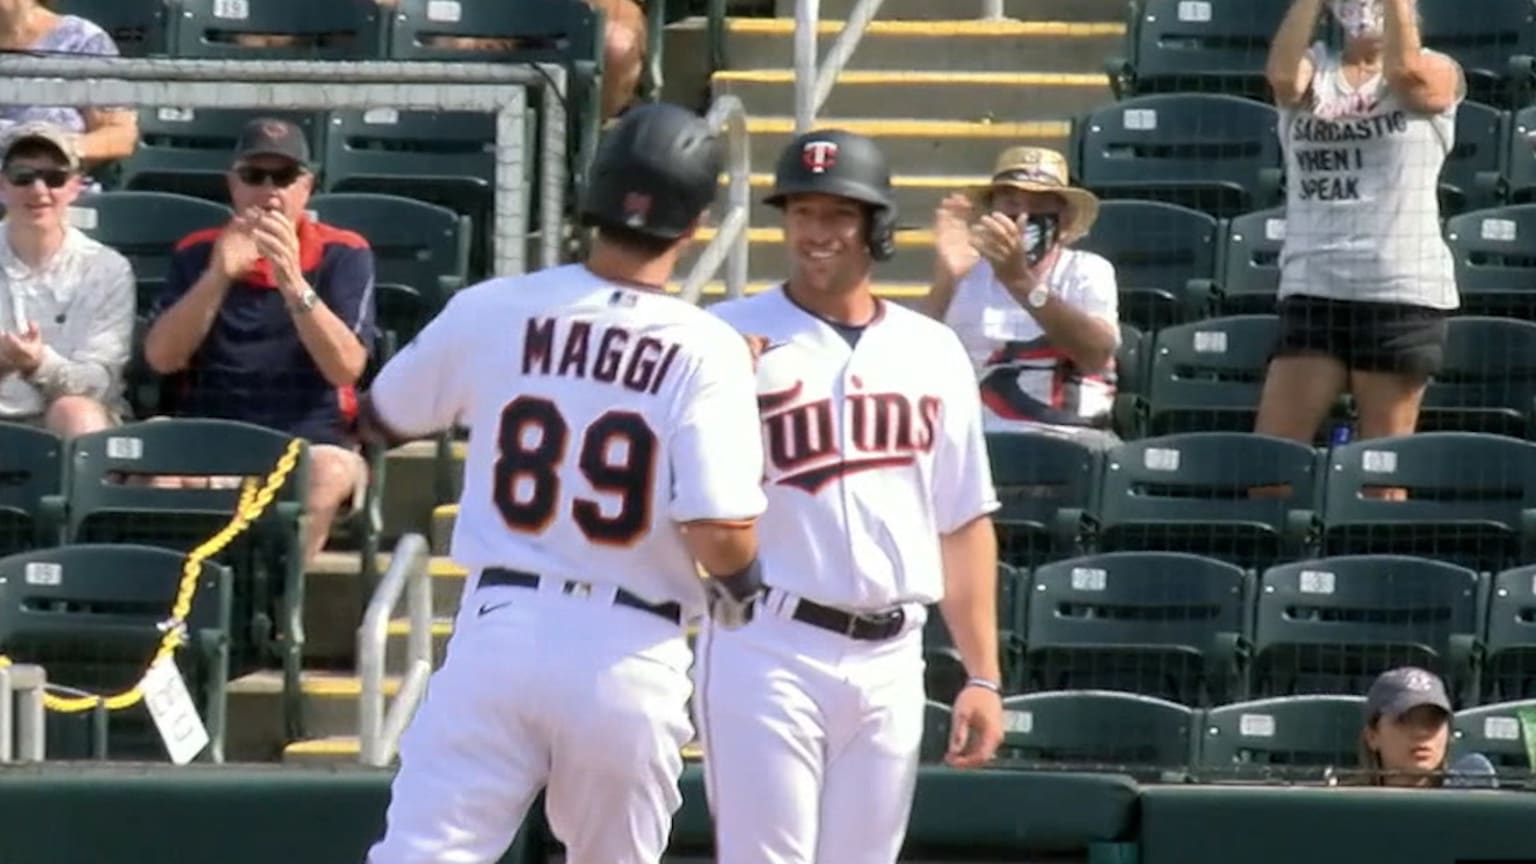 This is a 2021 photo of Drew Maggi of the Minnesota Twins baseball